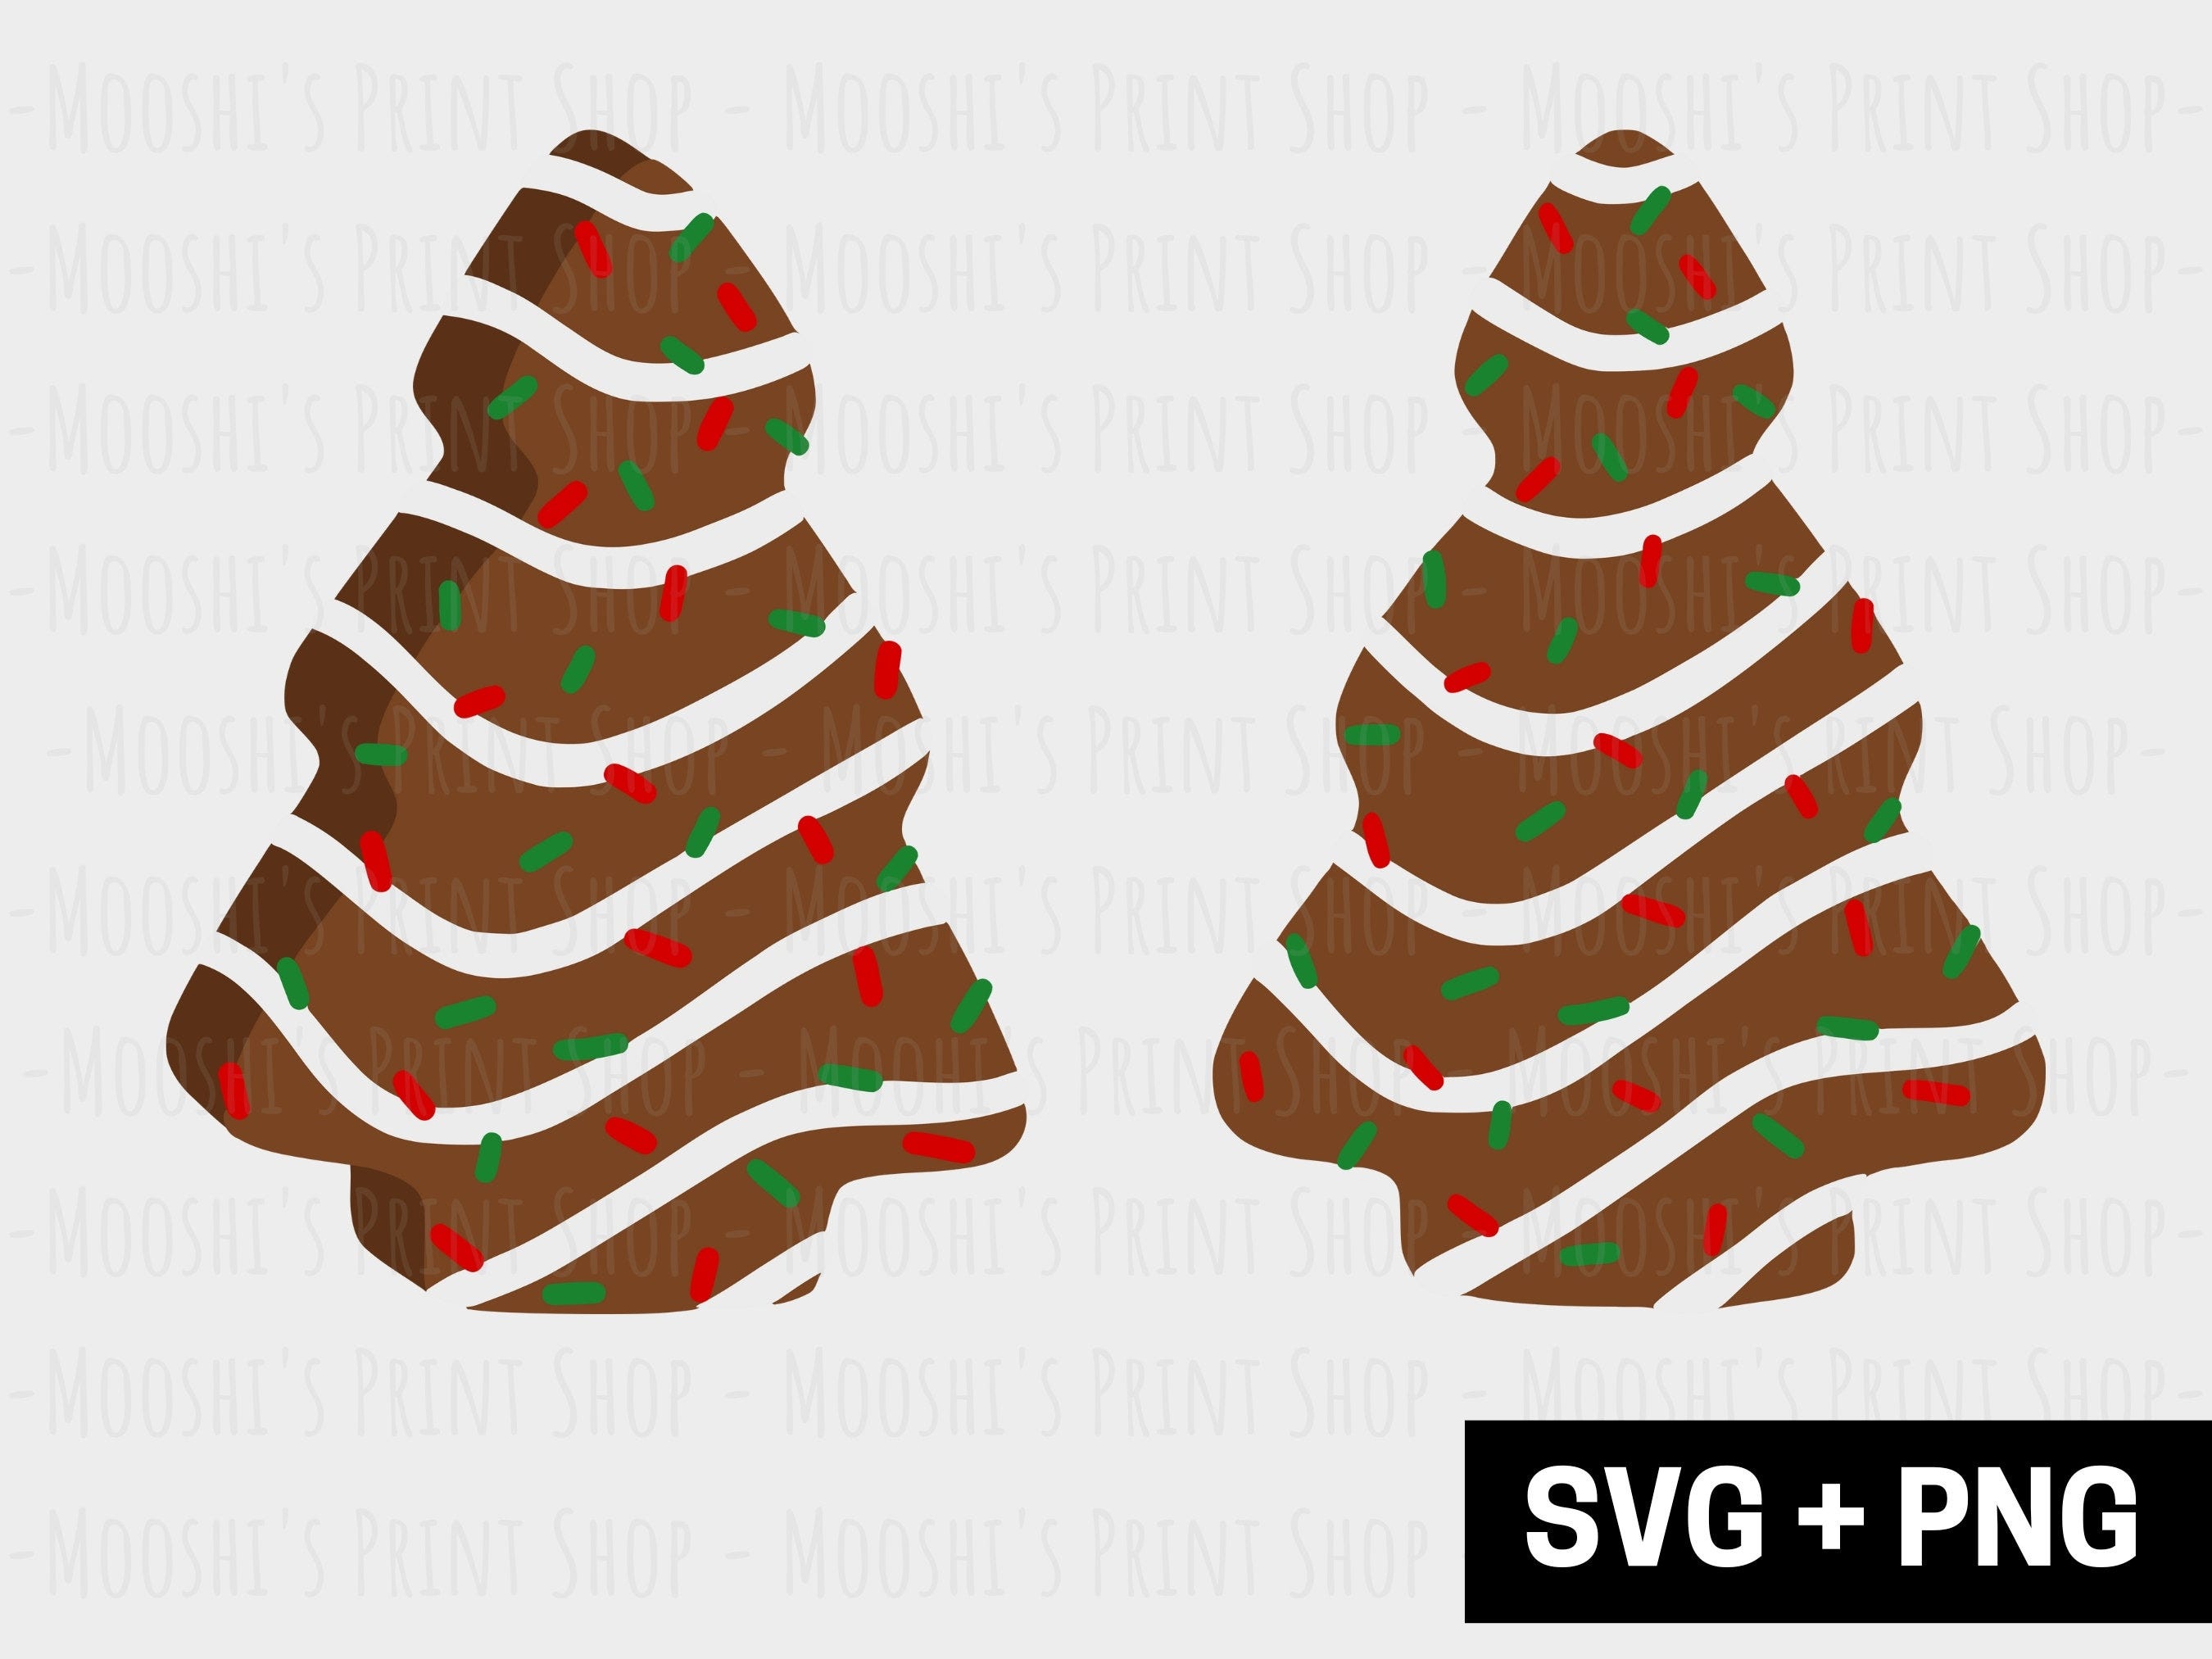 Chocolate Christmas Tree Cake Clipart Bundle, Trendy Holiday Sweet Xmas Dessert Graphics, Cute Sublimation Image Cut File, Download SVG PNG